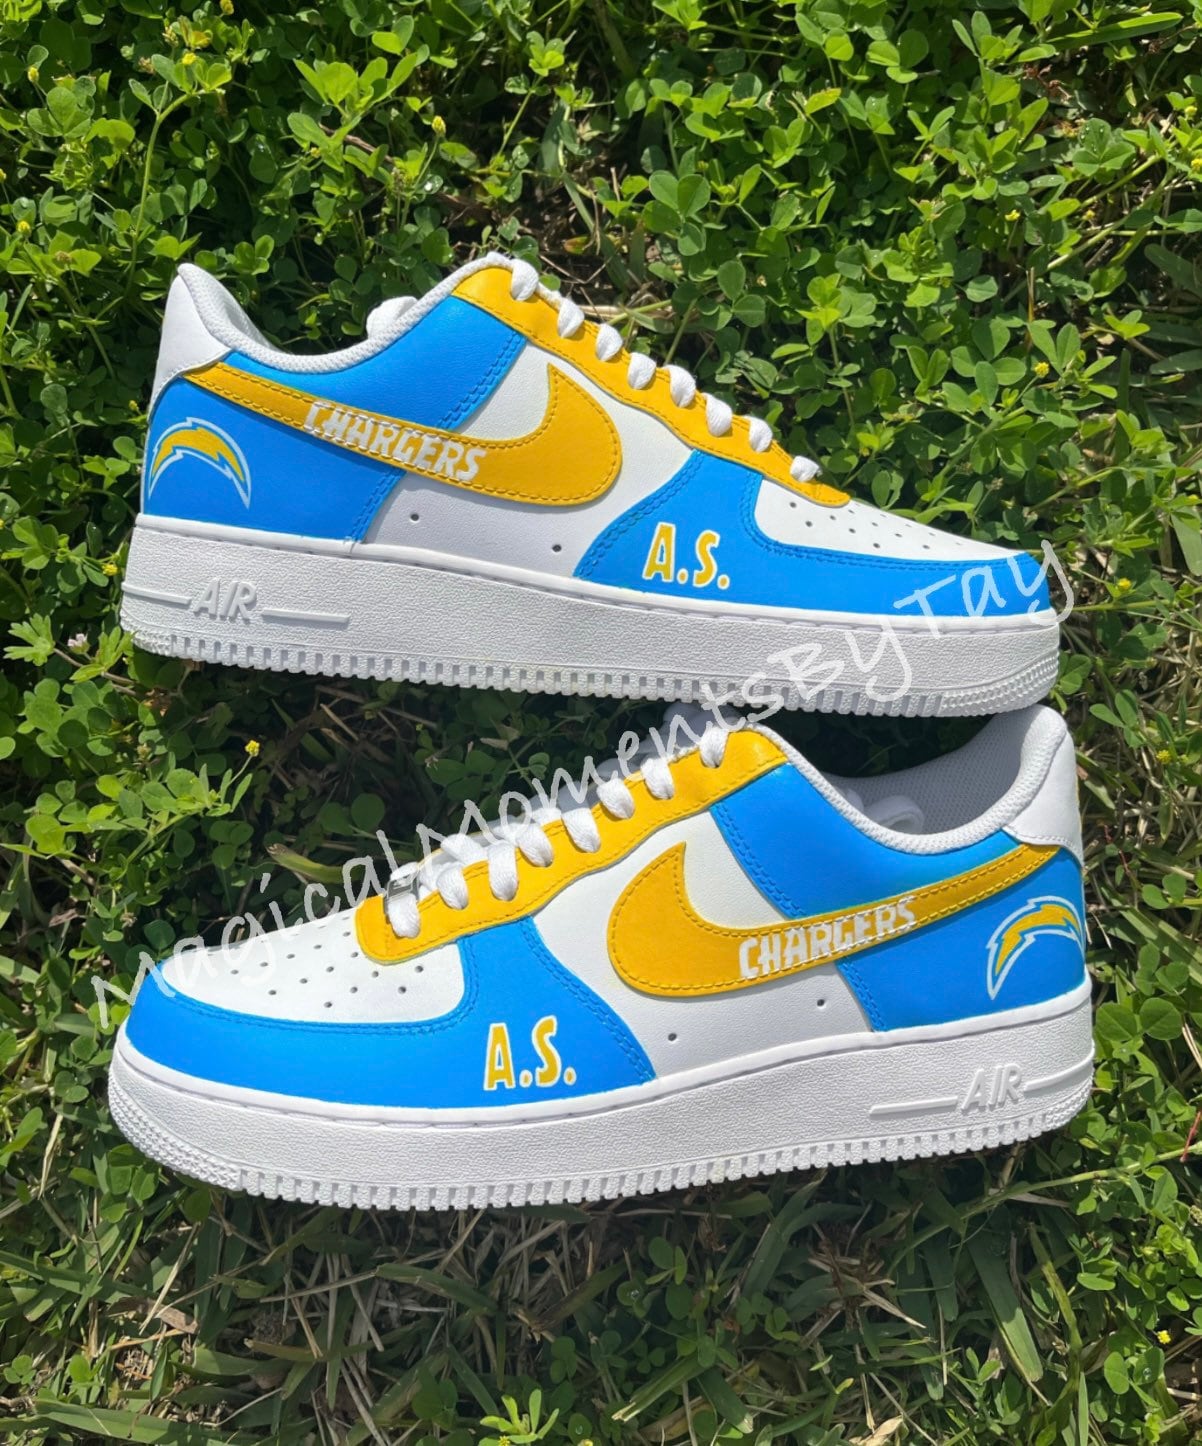 Chargers Air Force 1s Three Tone Air Force 1s NFL Air - Etsy